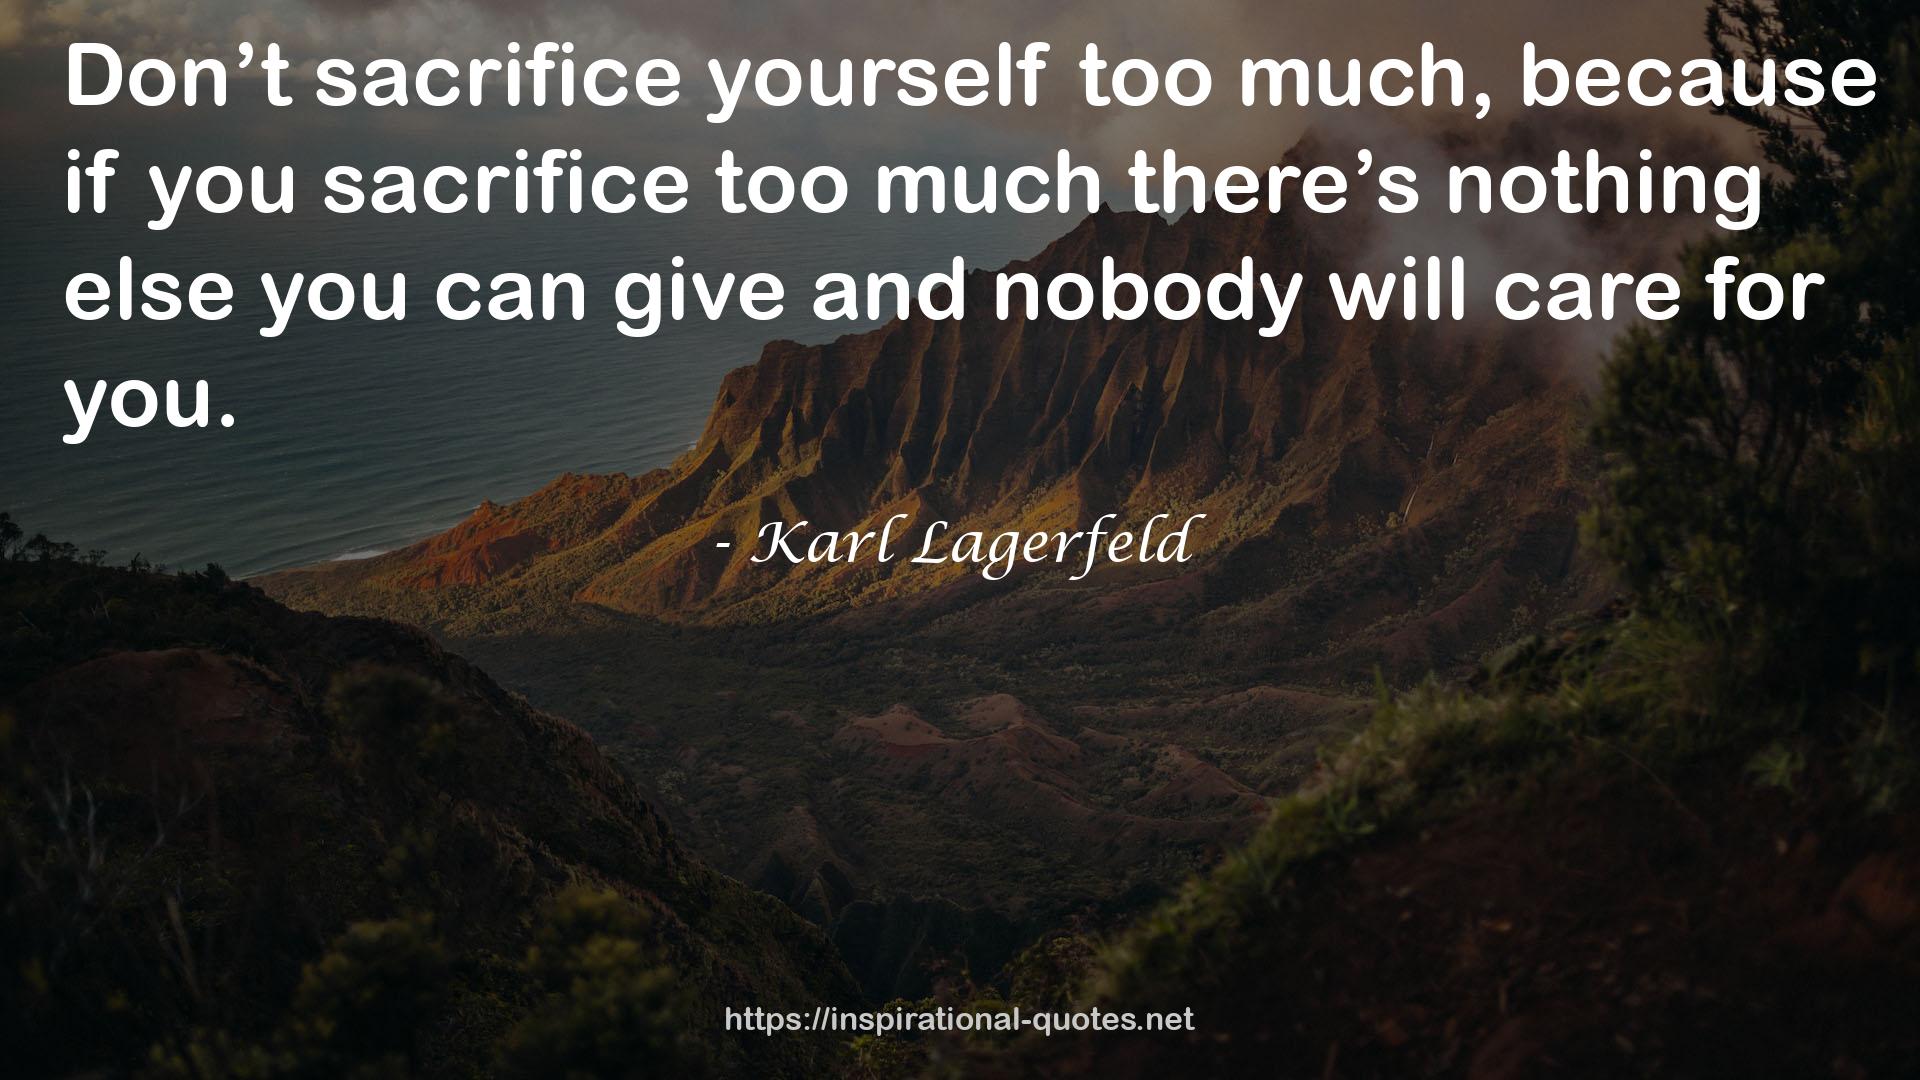 Karl Lagerfeld QUOTES